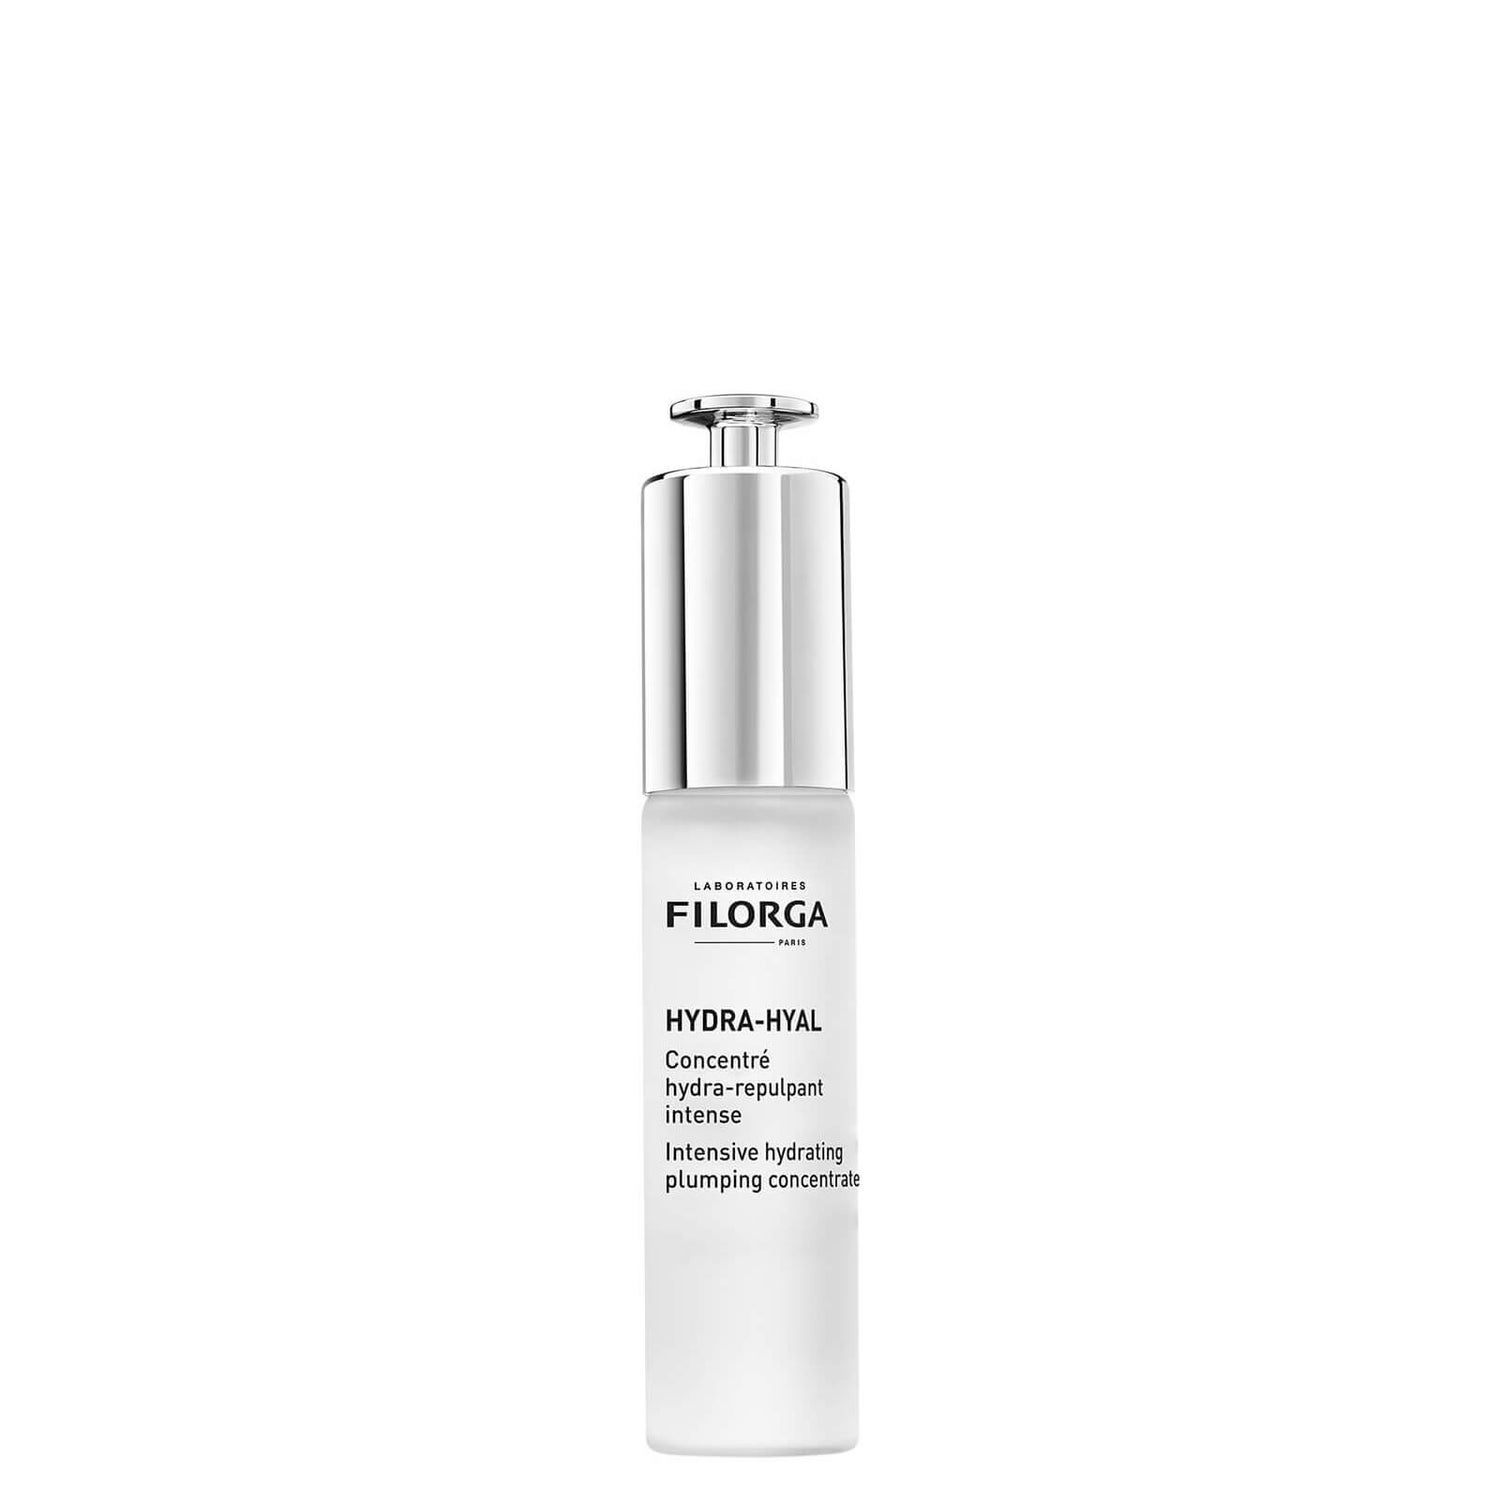 Filorga HYDRA-HYAL Intense Hydrating Plumping Concentrate (1 fl. oz.)